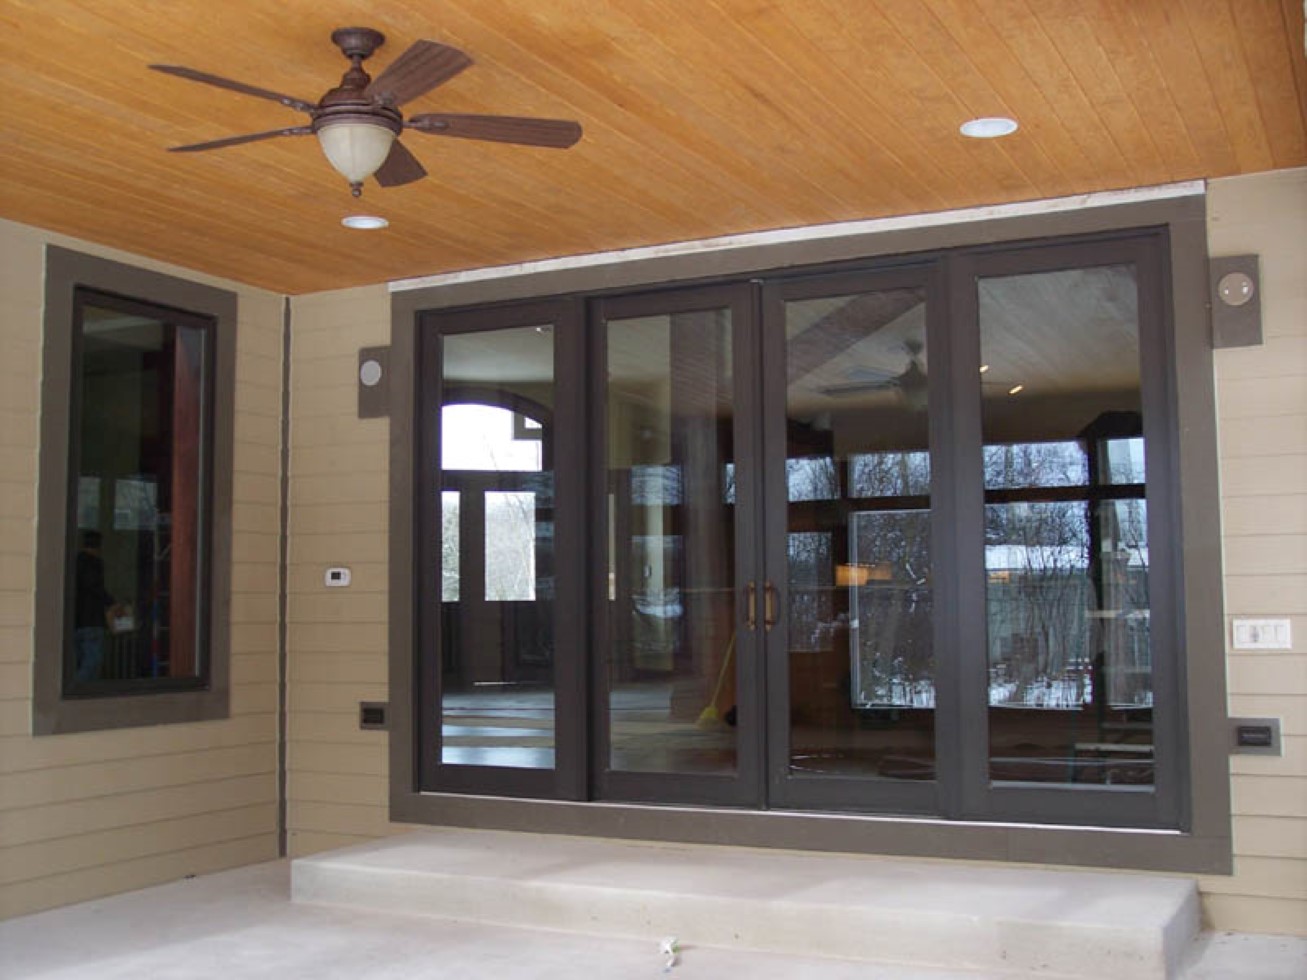 Hidden Lamp Fan White Hidden Lamp And Ceiling Fan Lighting In Modest Front Porch With Dashing Exterior Sliding Door Exterior Appealing Exterior Sliding Door Designs To Perfect Your Home